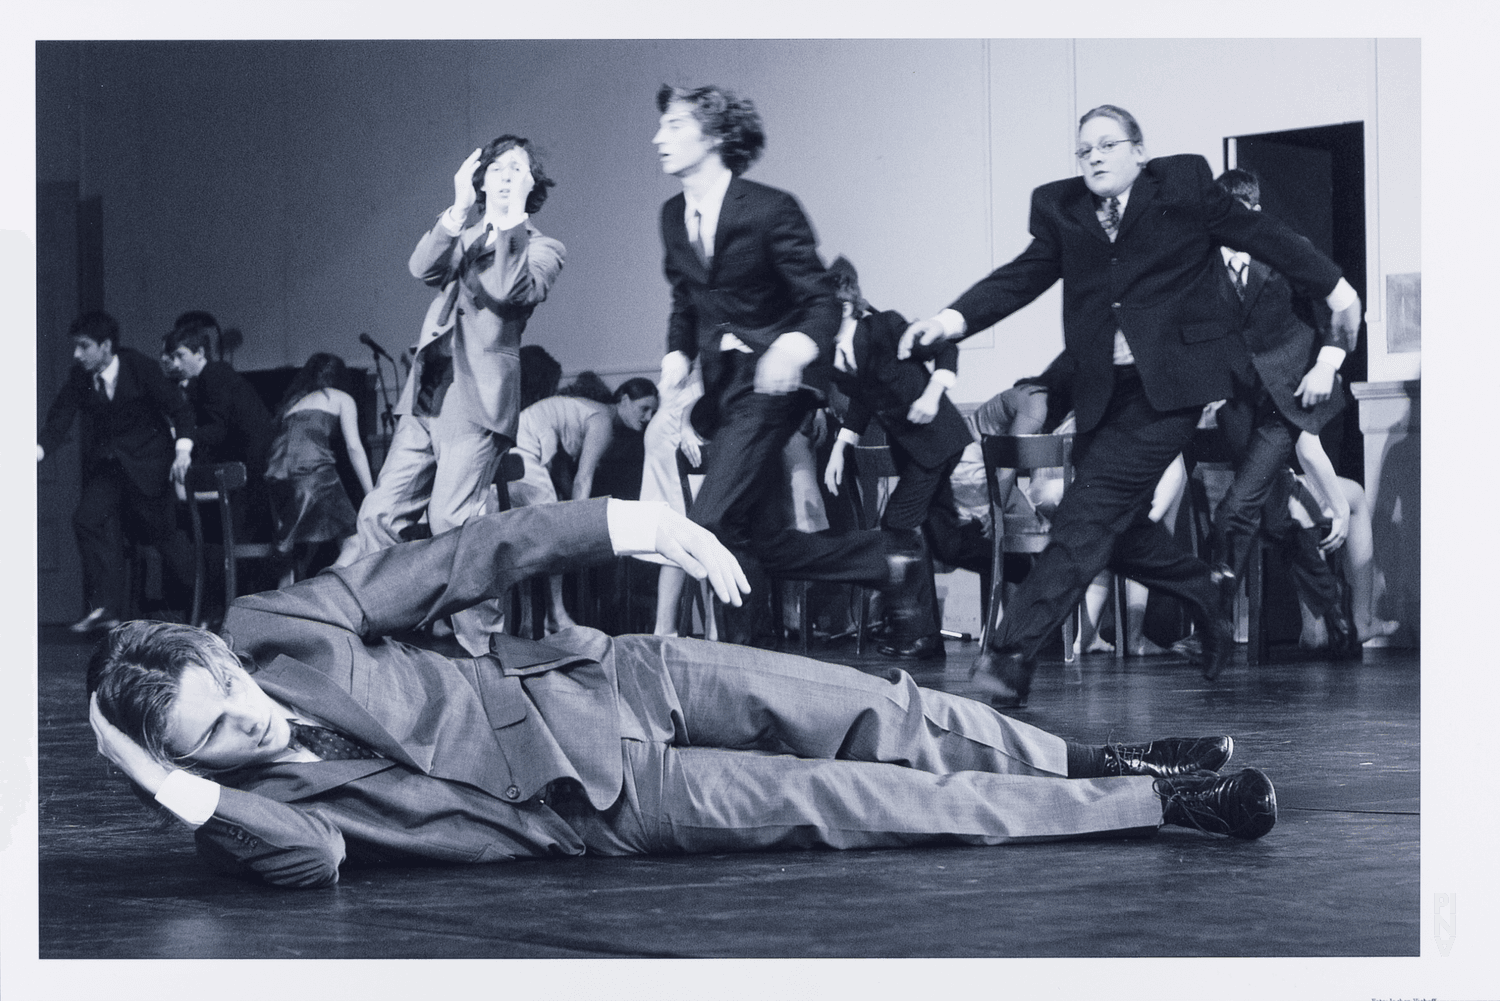 “Kontakthof. With Teenagers over 14” by Pina Bausch